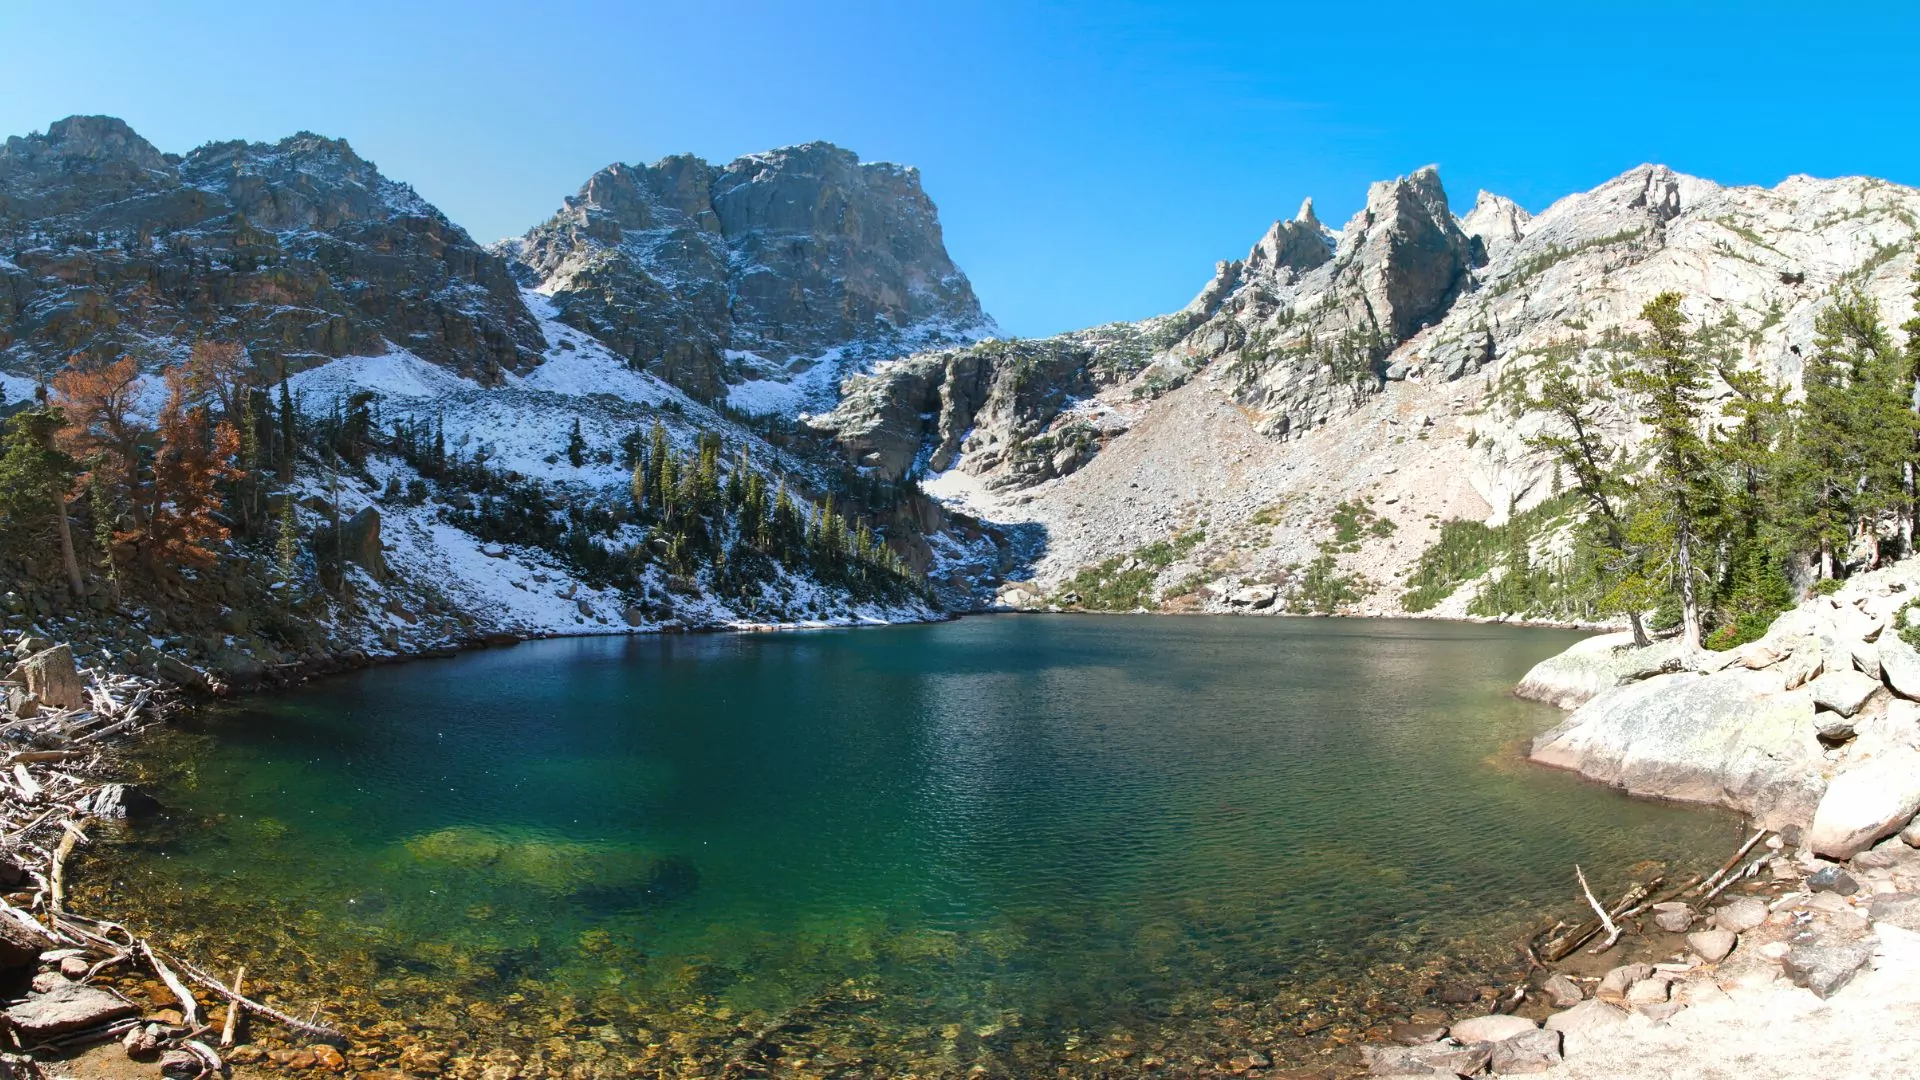 Deep green colored clear lake occupies lower half of photo with towering snowy peaks behind